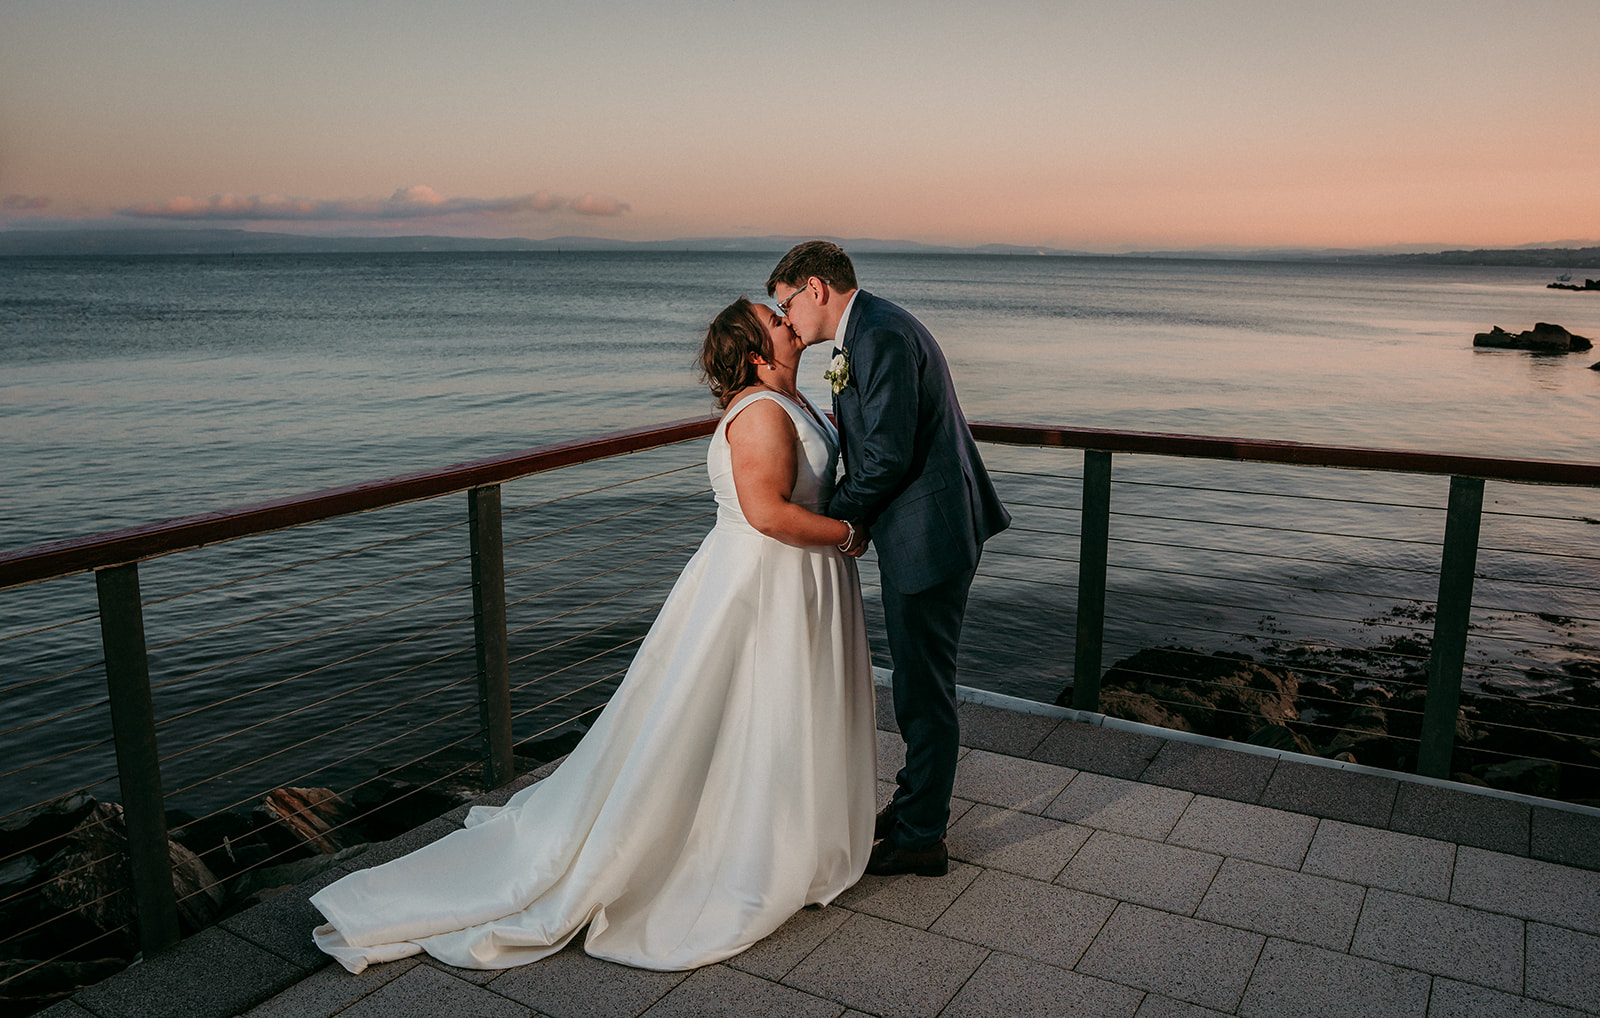 Redcastle Hotel, Donegal, Ireland, weddings by James Aiken Photography